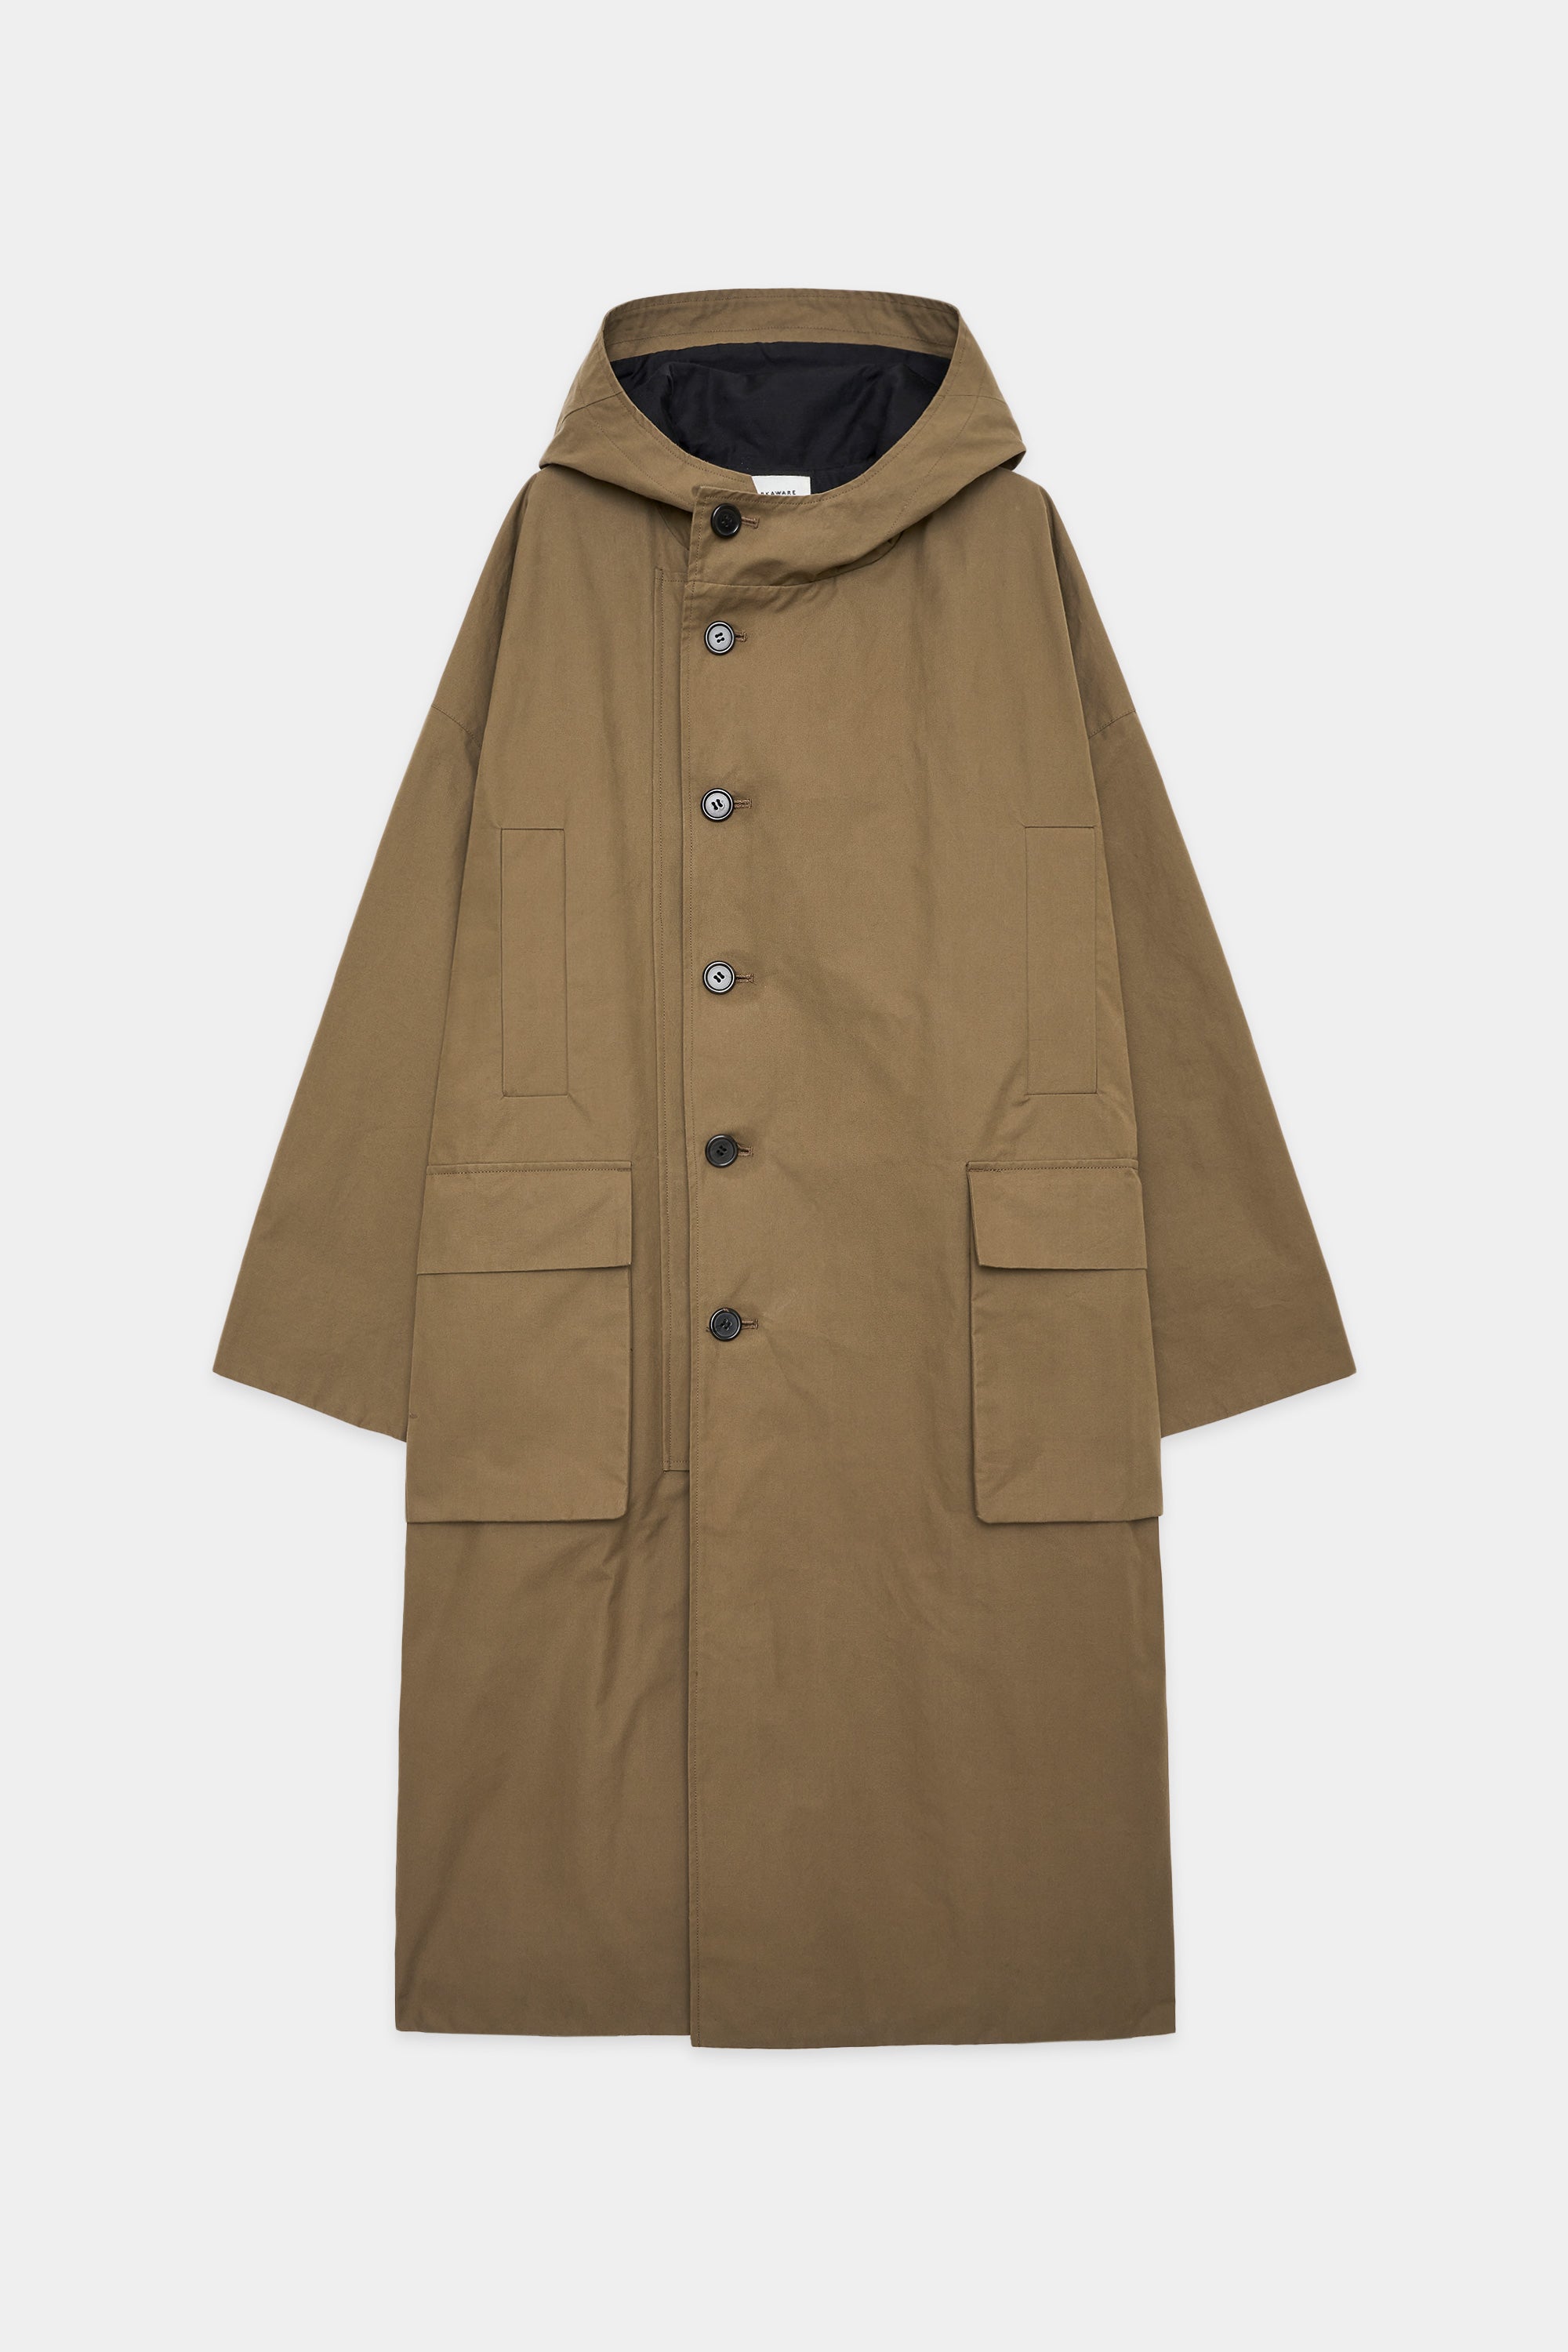 HEAVY ALL WEATHER CLOTH STORM COAT, Coyote